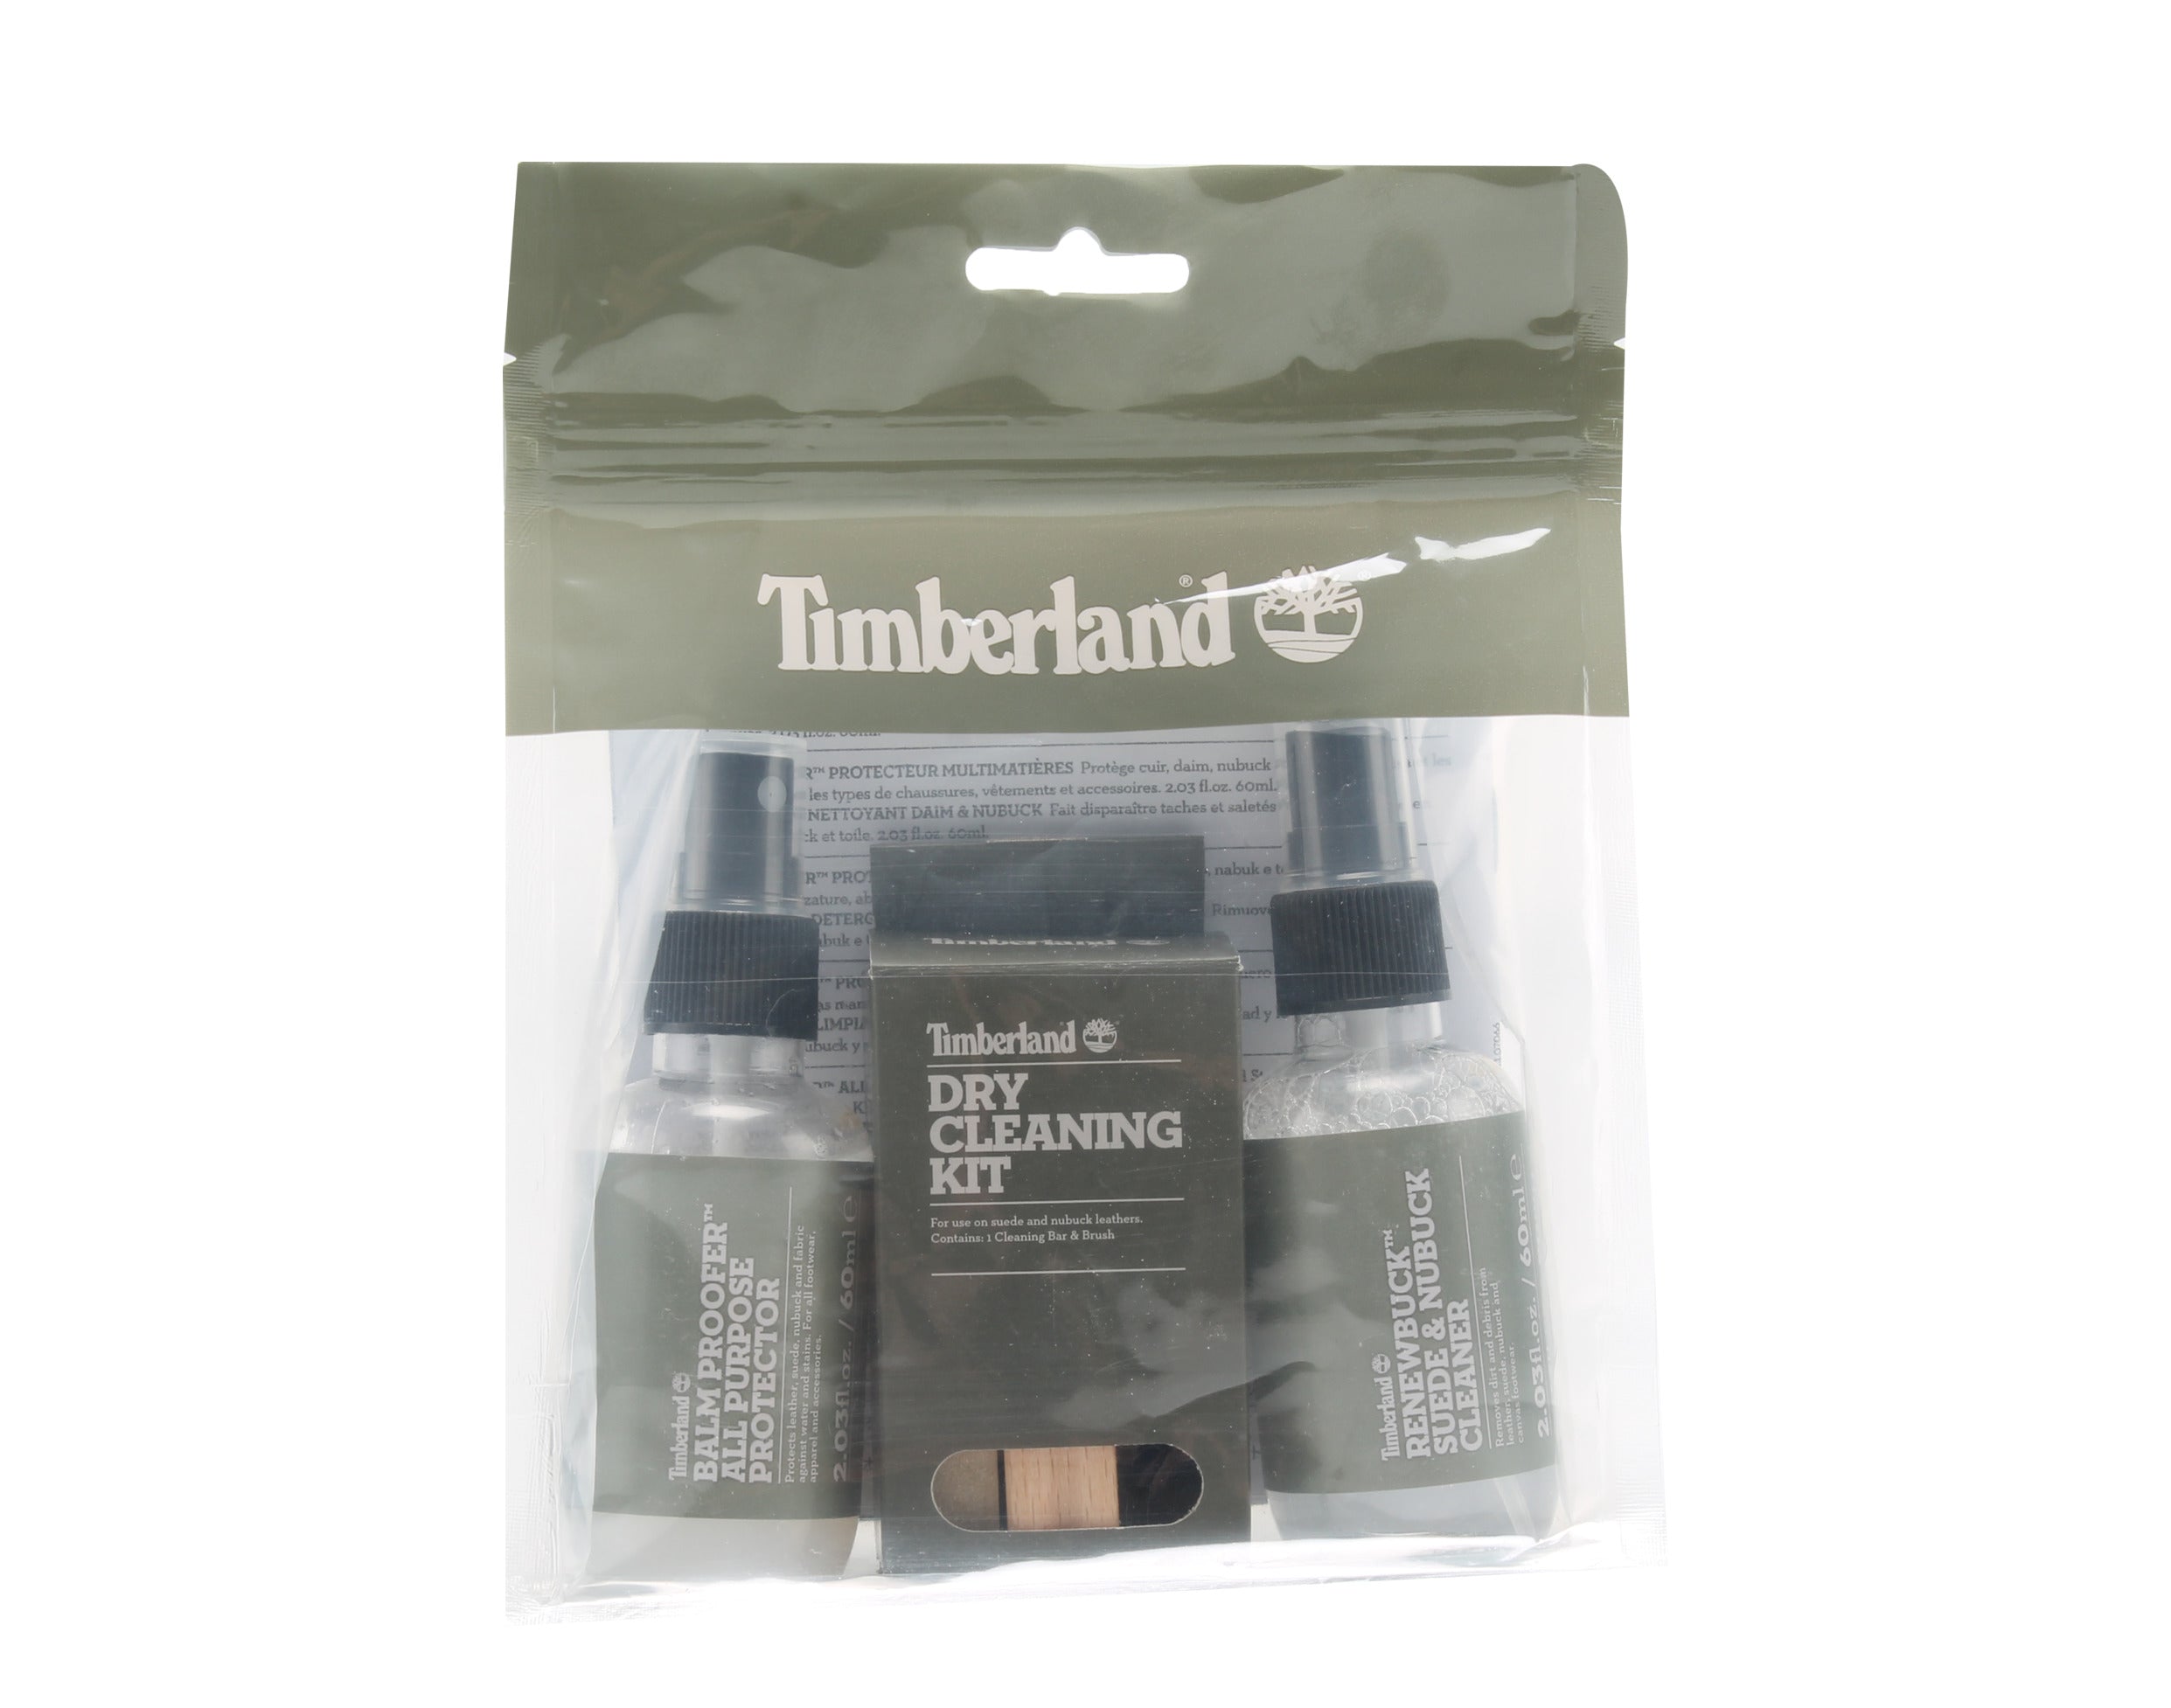 Timberland - Dry Cleaning Kit